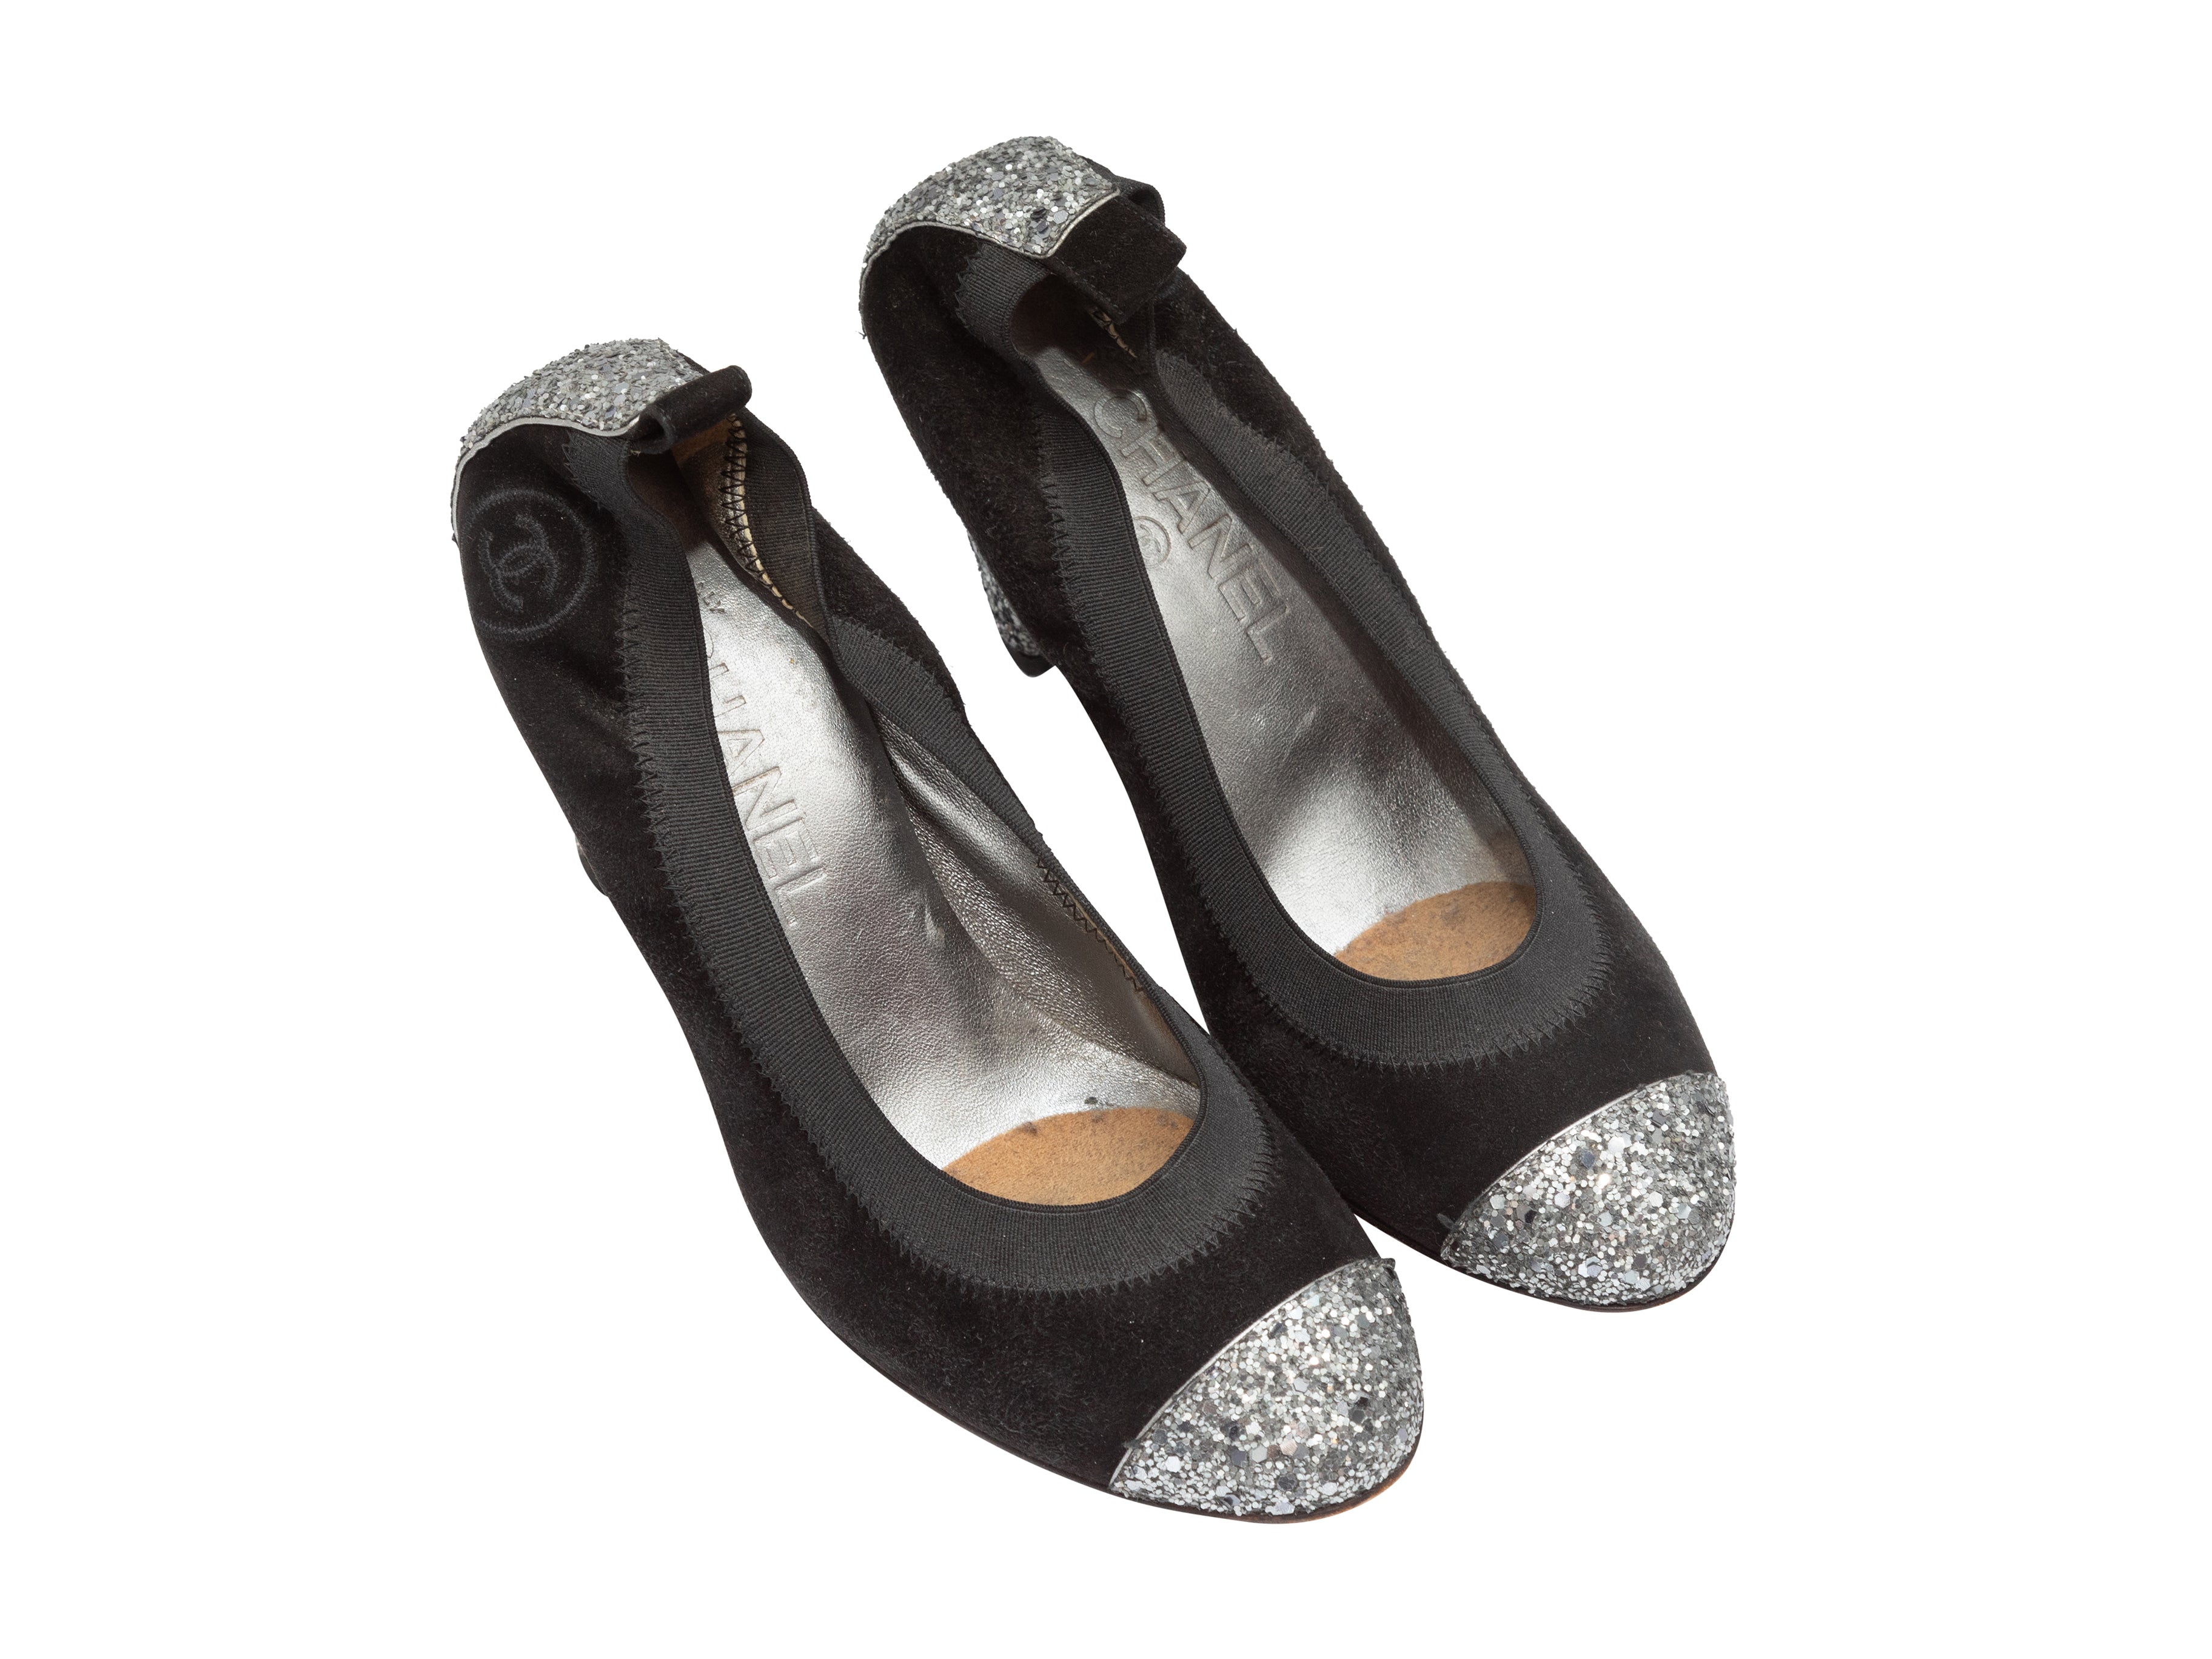 Chanel pre-owned black sparkly tweed ballet flats